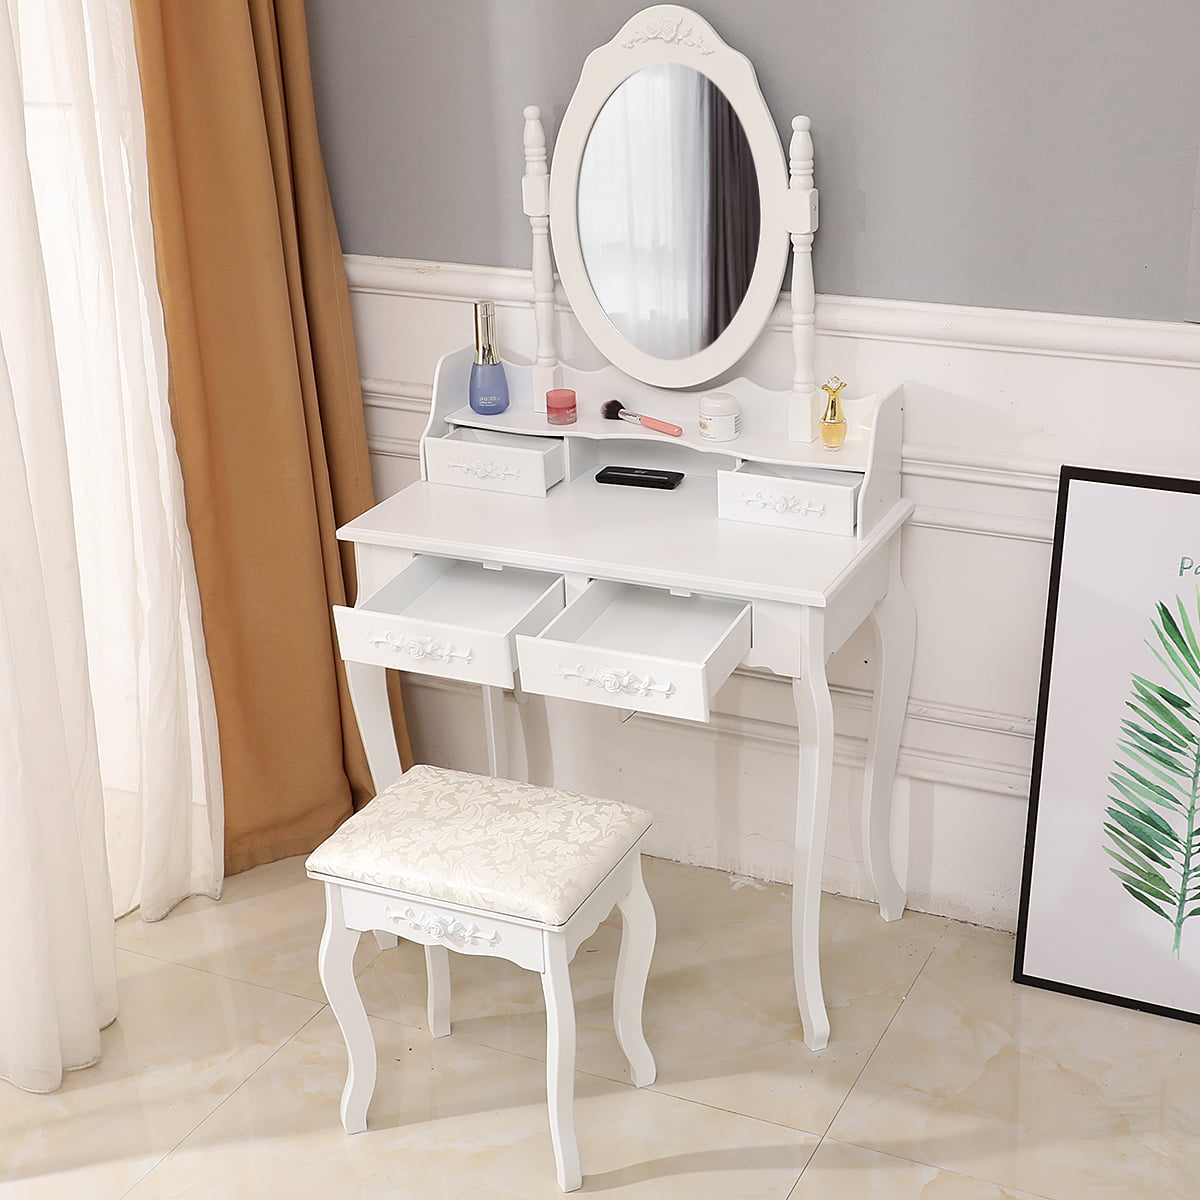 Details about   White Vanity Makeup Dressing Table Set w/Stool 4 Drawer&Mirror Jewelry Wood Desk 